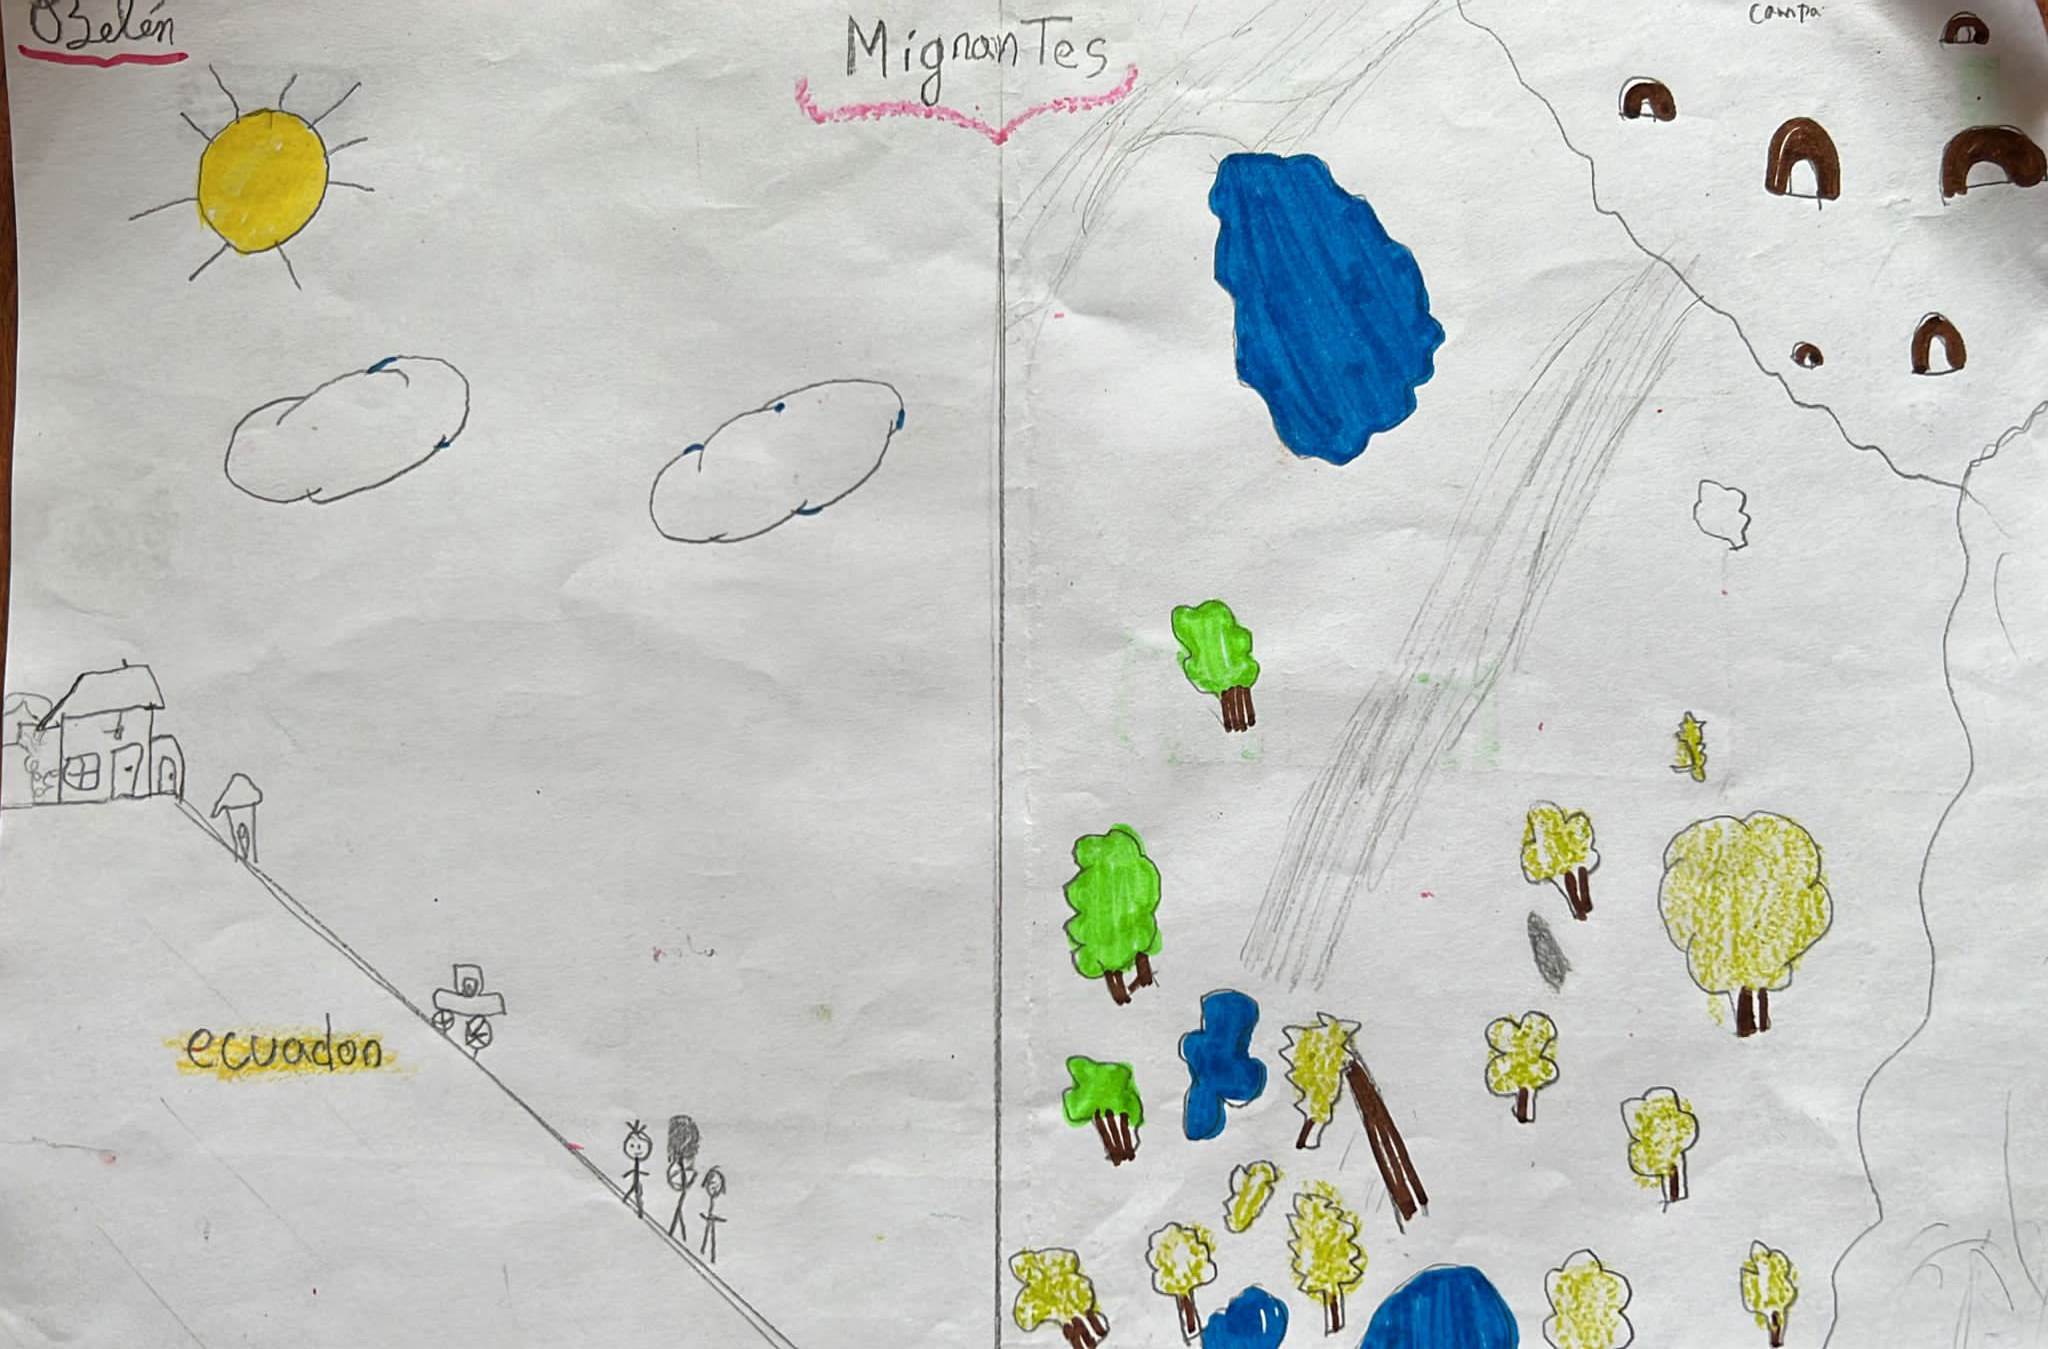 A child&#x27;s drawing showing their journey from Ecuador to the US border